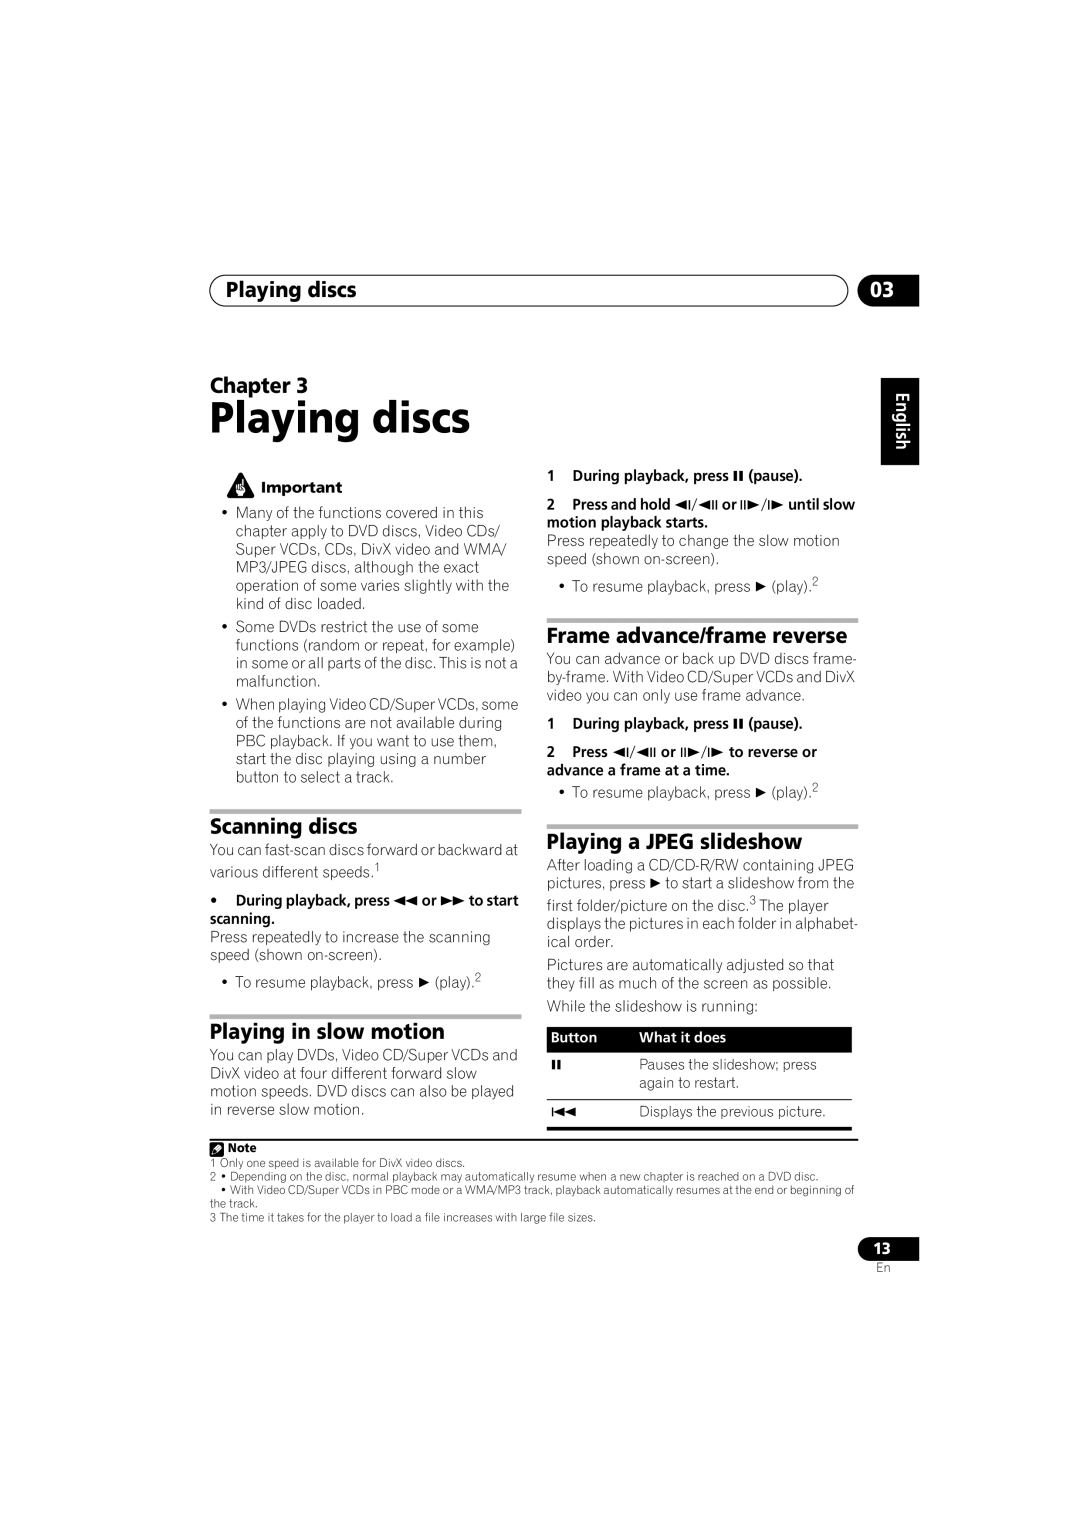 Pioneer S-DV232T, S-DV131 Playing discs Chapter, Frame advance/frame reverse, Scanning discs, Playing a JPEG slideshow 